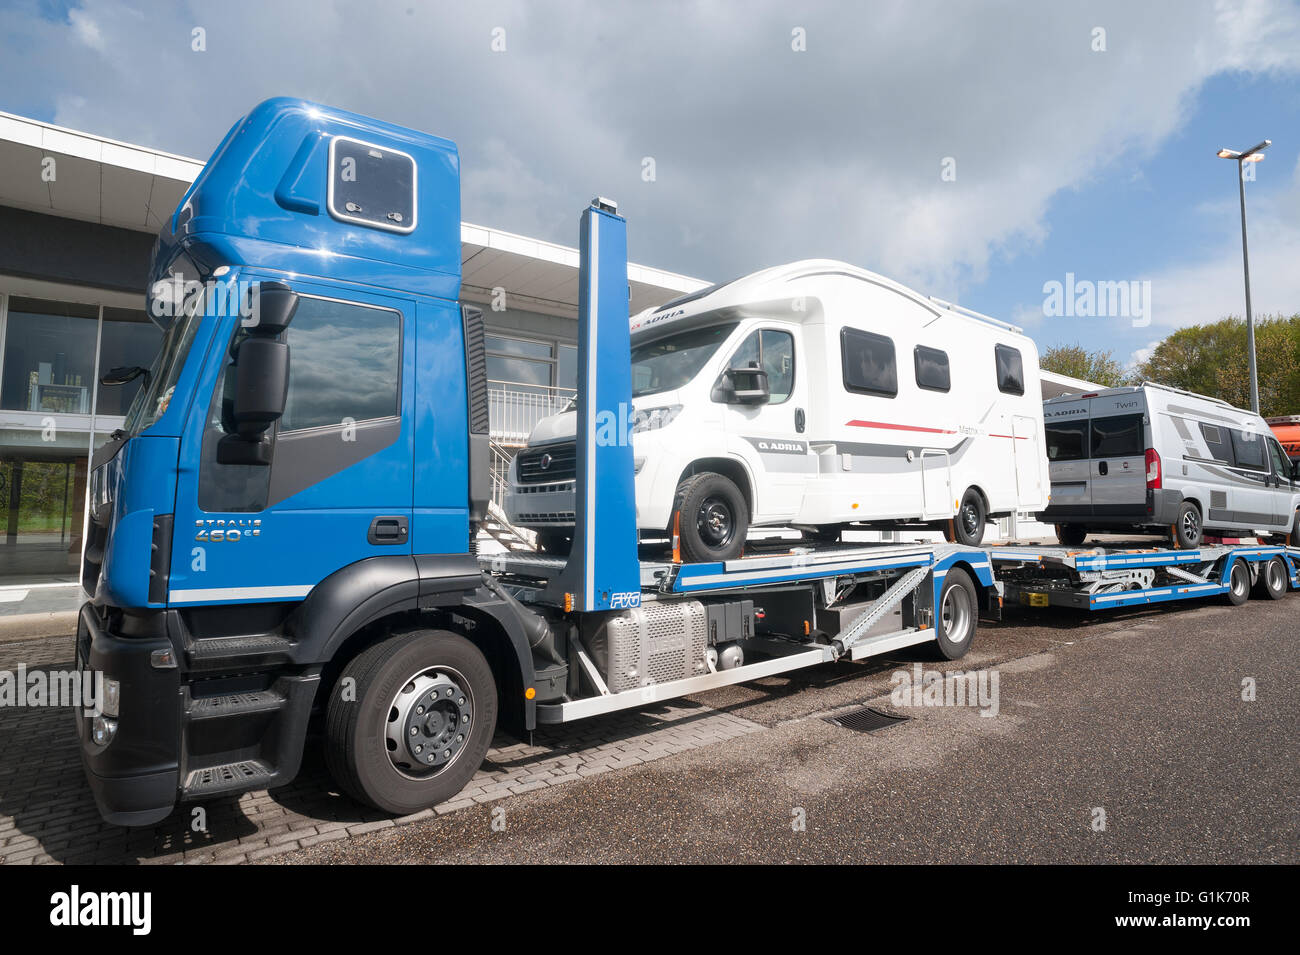 Lichtenbusch, Germany, May 3, 2016: Truck transporter carrying RVs, on a public parking place at a truck stop in Germany. Stock Photo